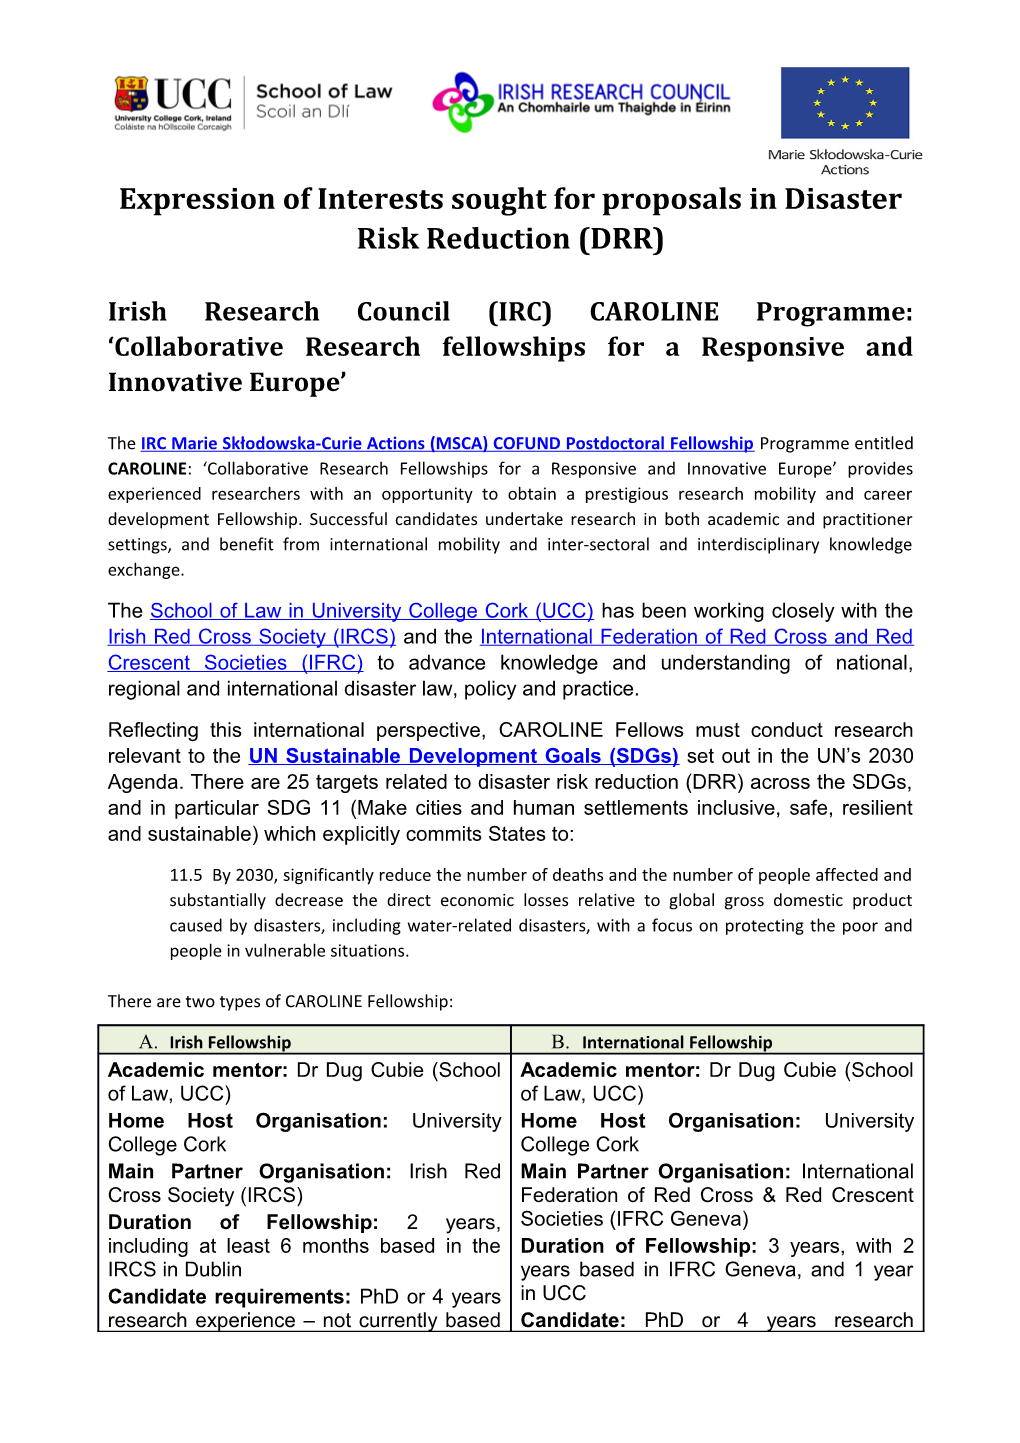 Expression of Interests Sought for Proposals in Disaster Risk Reduction (DRR)